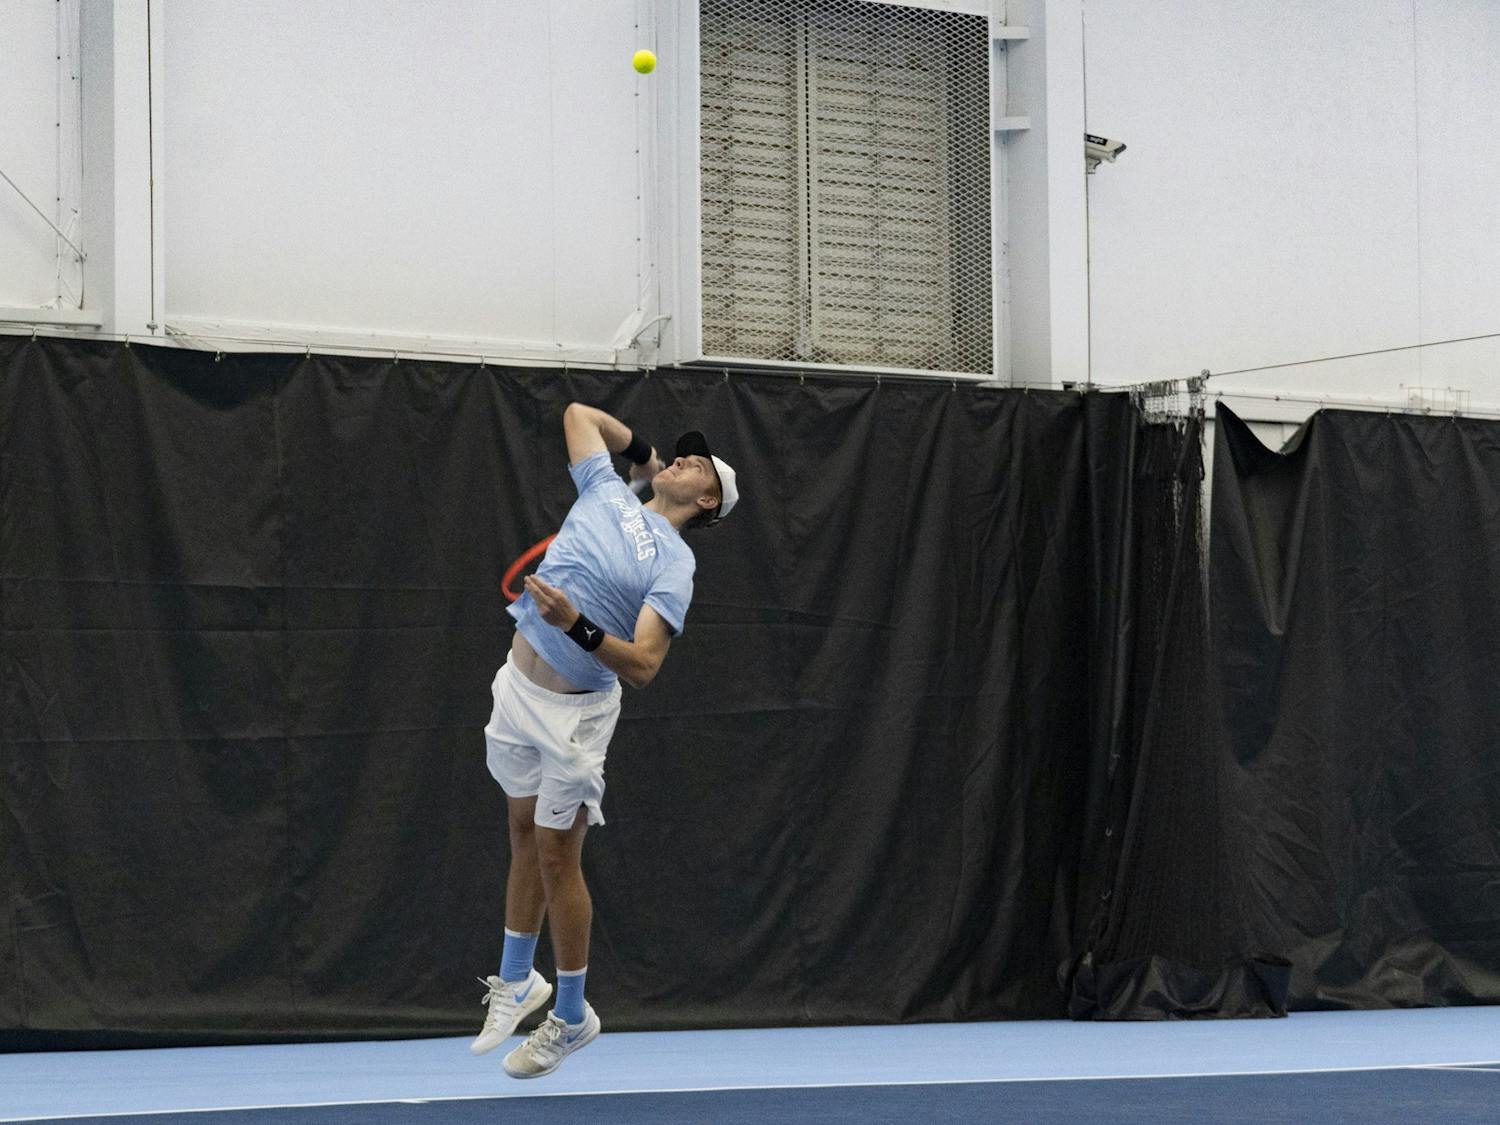 UNC graduate tennis player Ryan Seggerman jumps to hit the ball during his singles home matchup against Duke at Cone-Kenfield Tennis Center on Saturday, April 8, 2023. UNC fell to Duke 5-2.